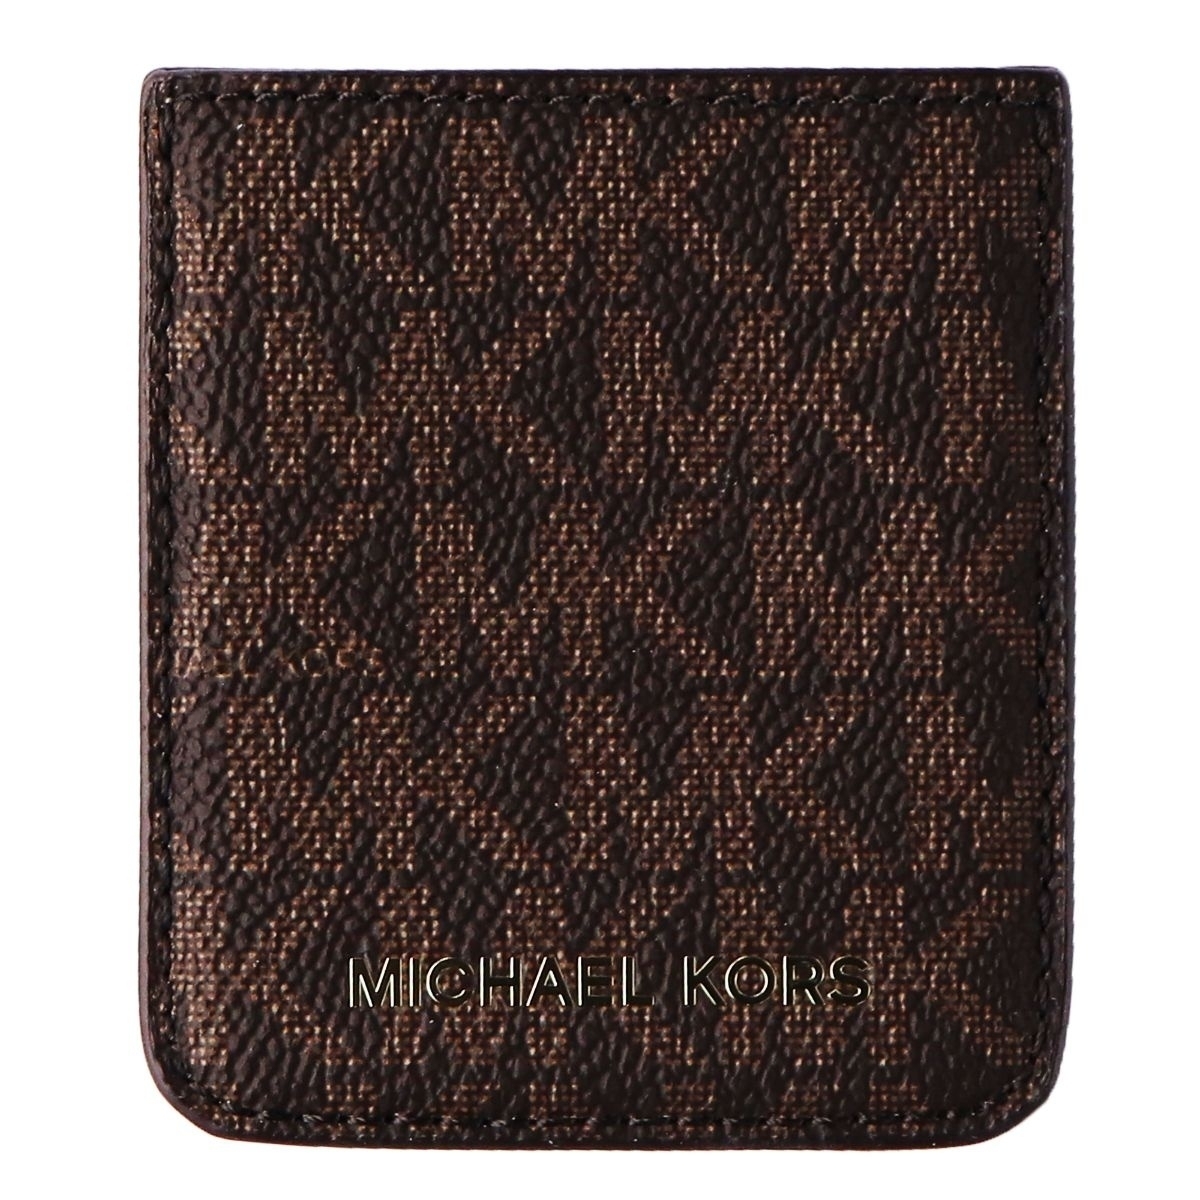 Michael Kors Phone Pocket Sticker With Adhesive Backing - Brown